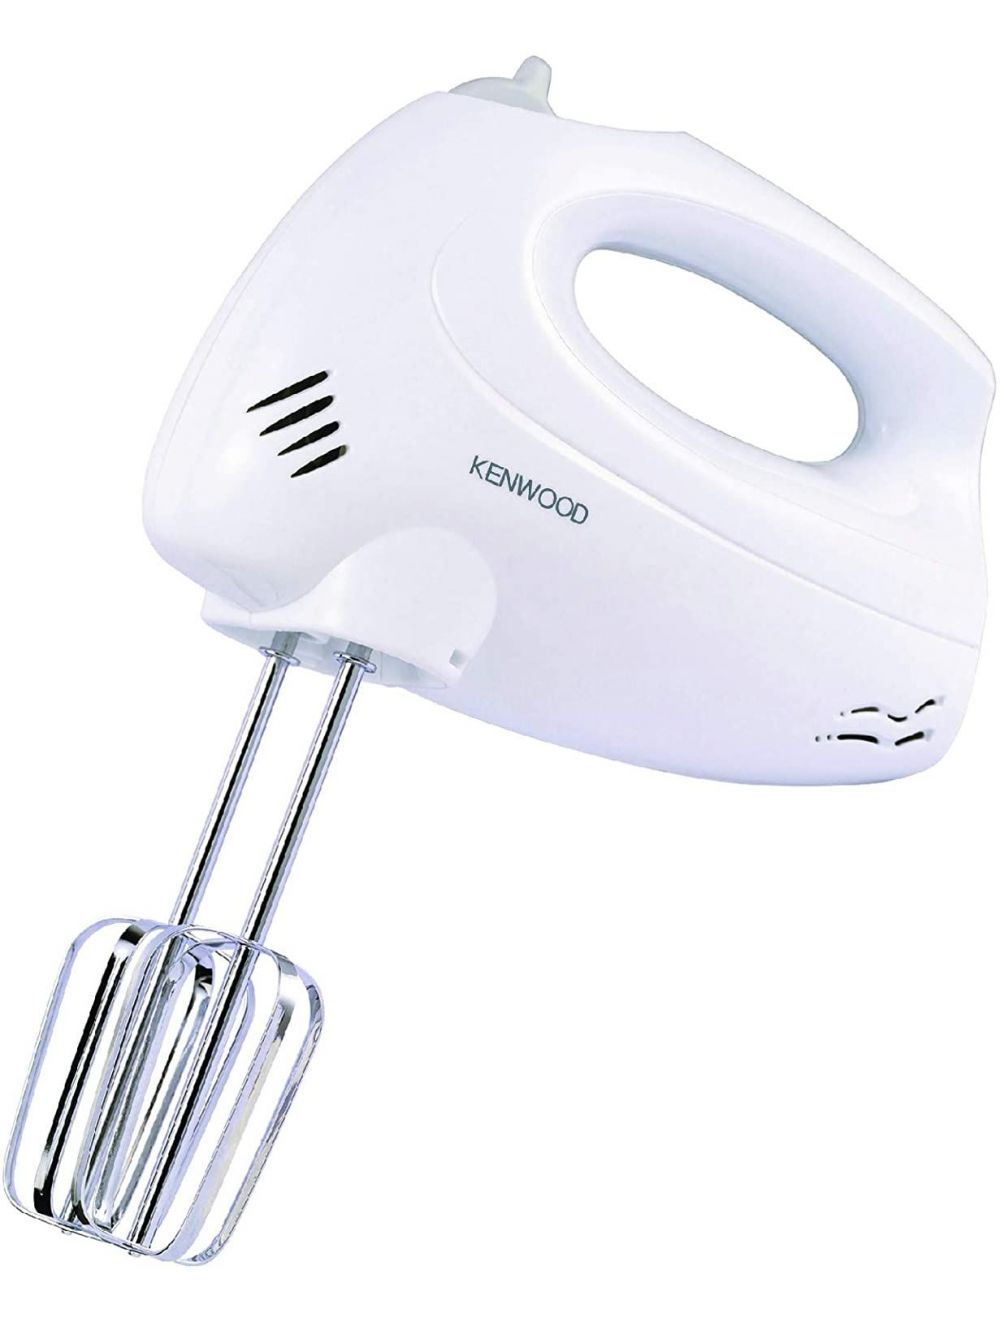 Kenwood White Compact Hand Mixer 6 Speeds Plus Turbo Twin Beaters-HM330